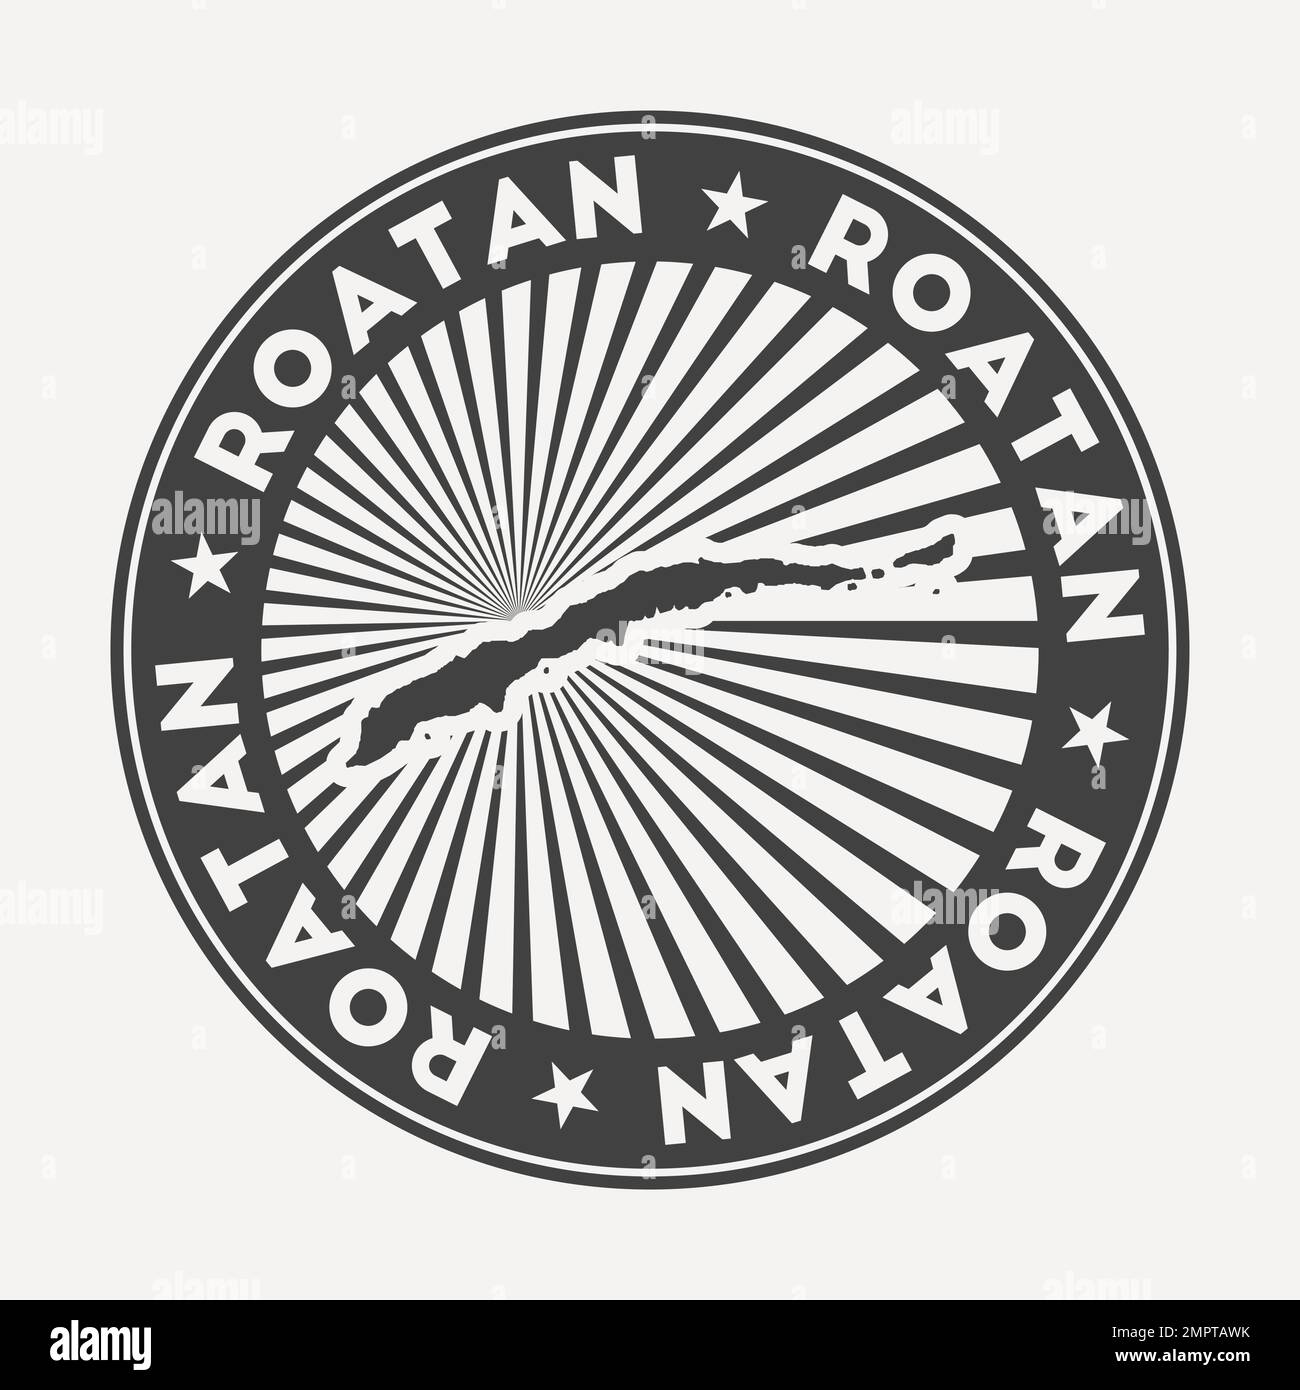 Roatan round logo. Vintage travel badge with the circular name and map of island, vector illustration. Can be used as insignia, logotype, label, stick Stock Vector